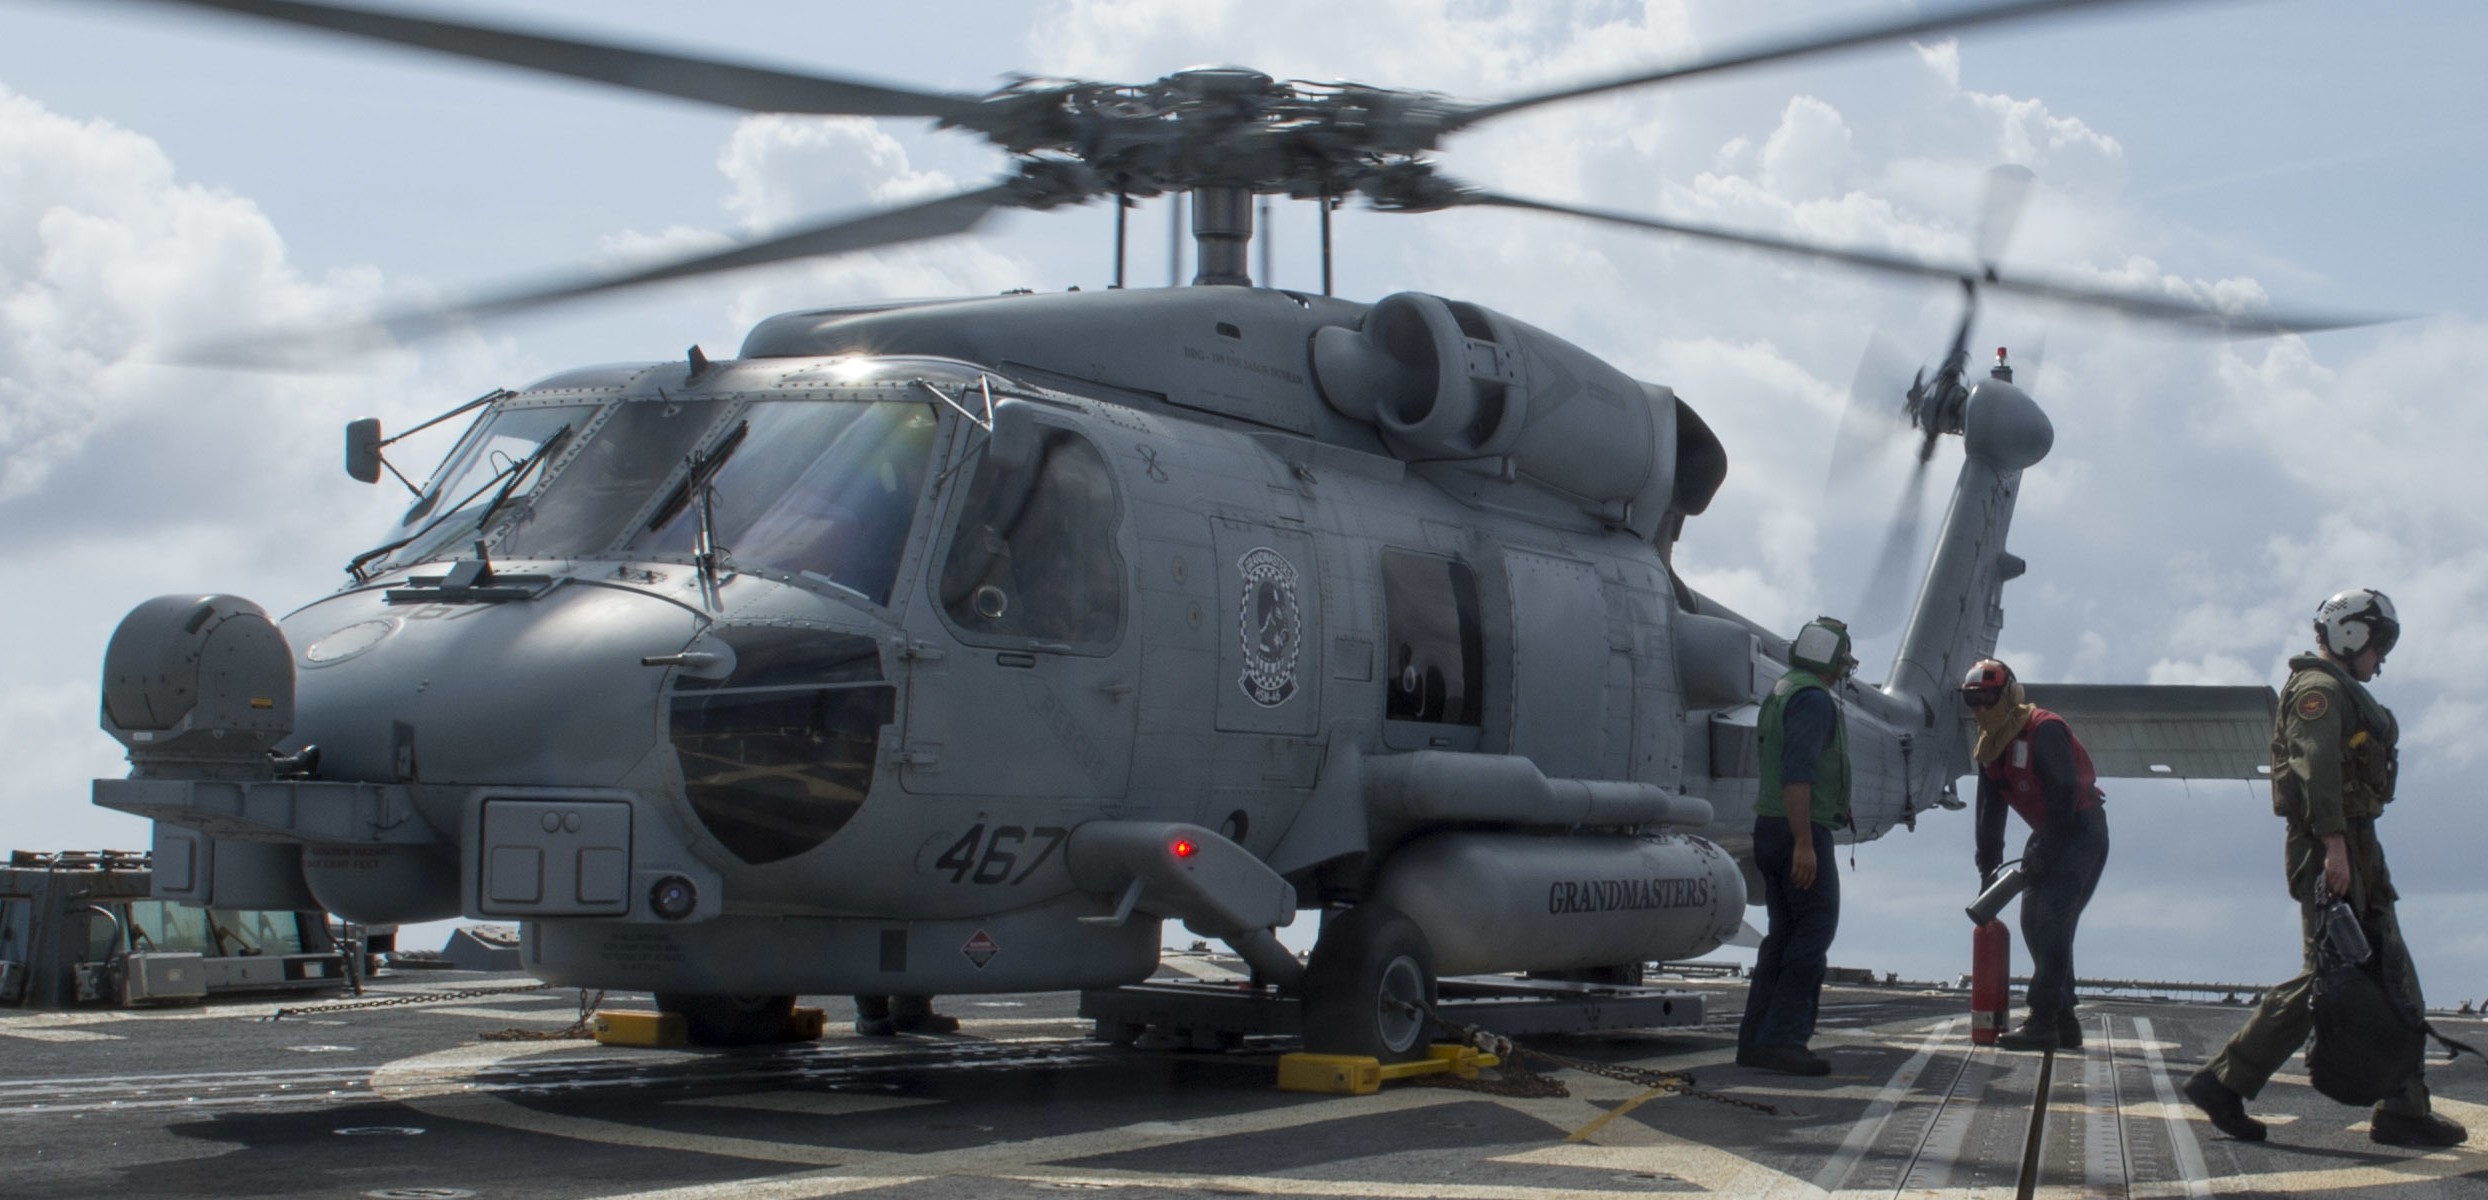 hsm-46 grandmasters helicopter maritime strike squadron mh-60r seahawk 2015 56